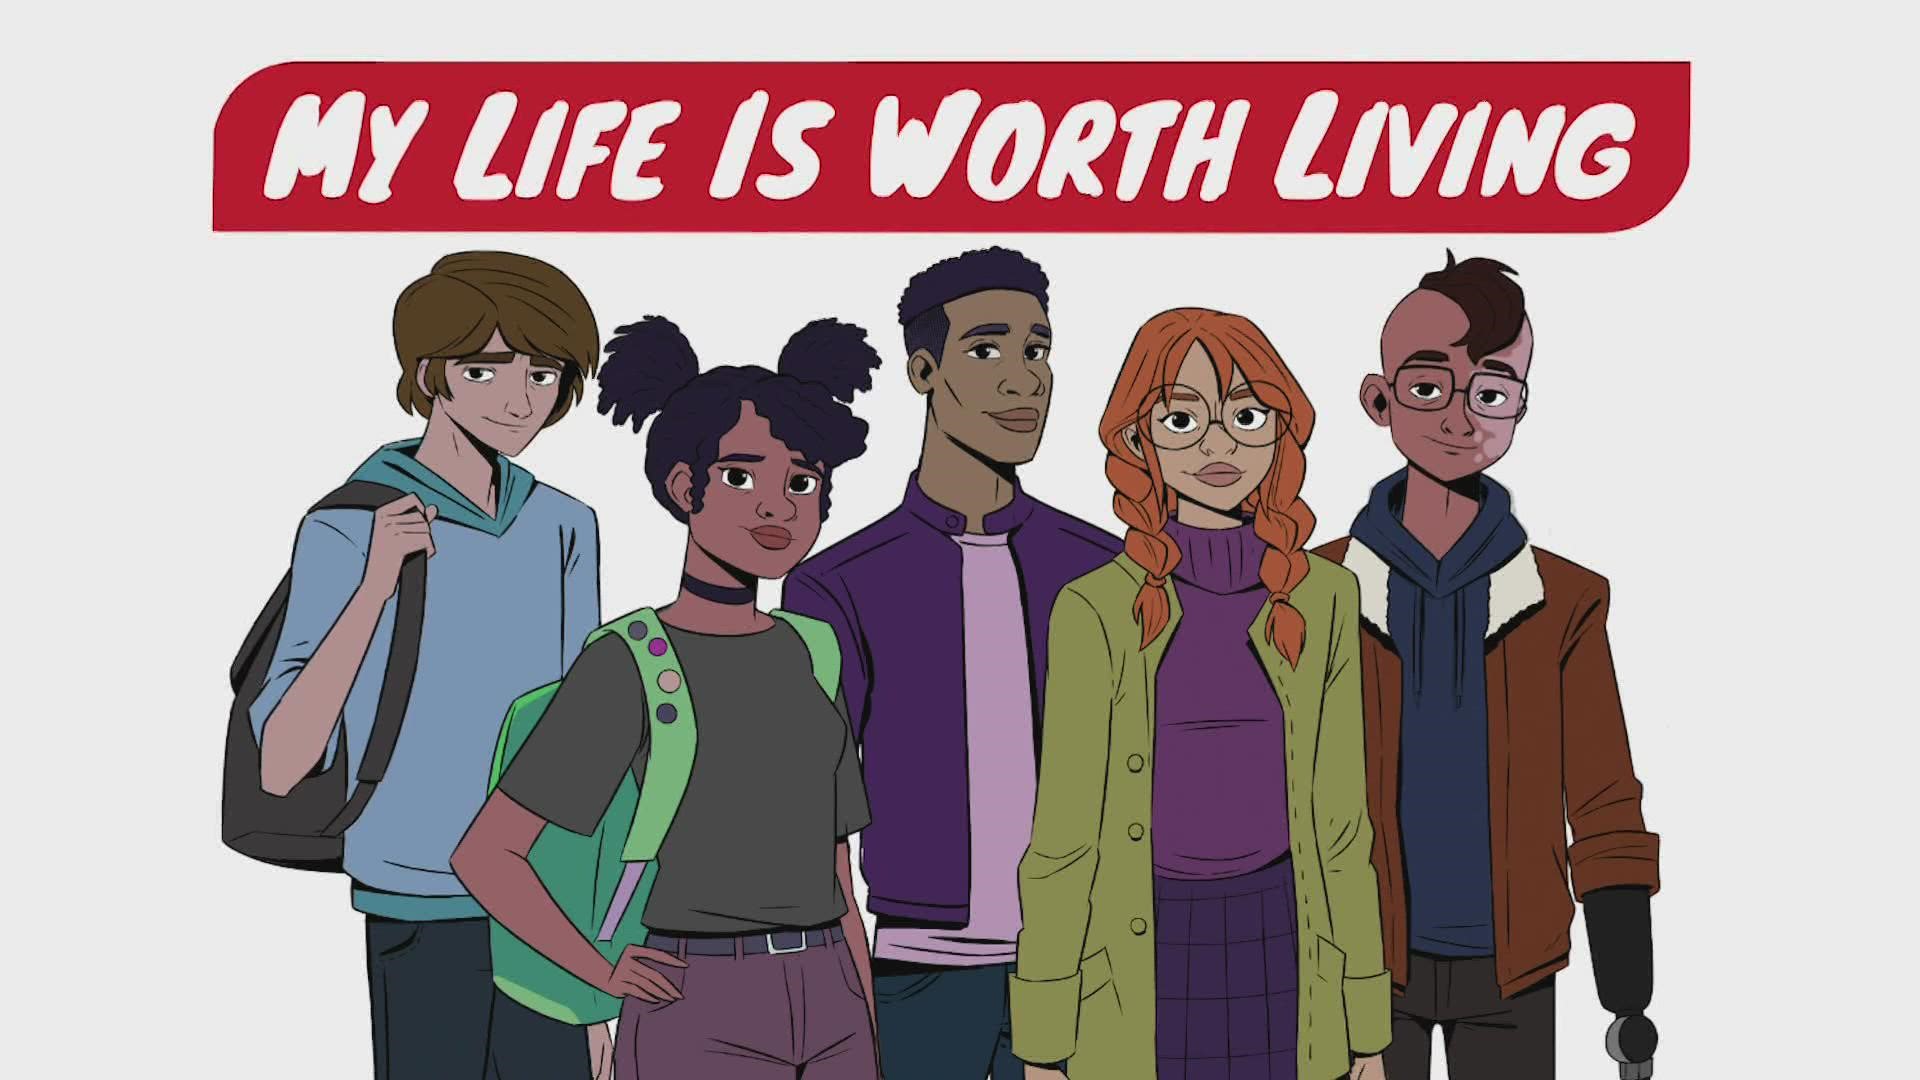 Snohomish animator creates new series aimed at teen suicide prevention |  